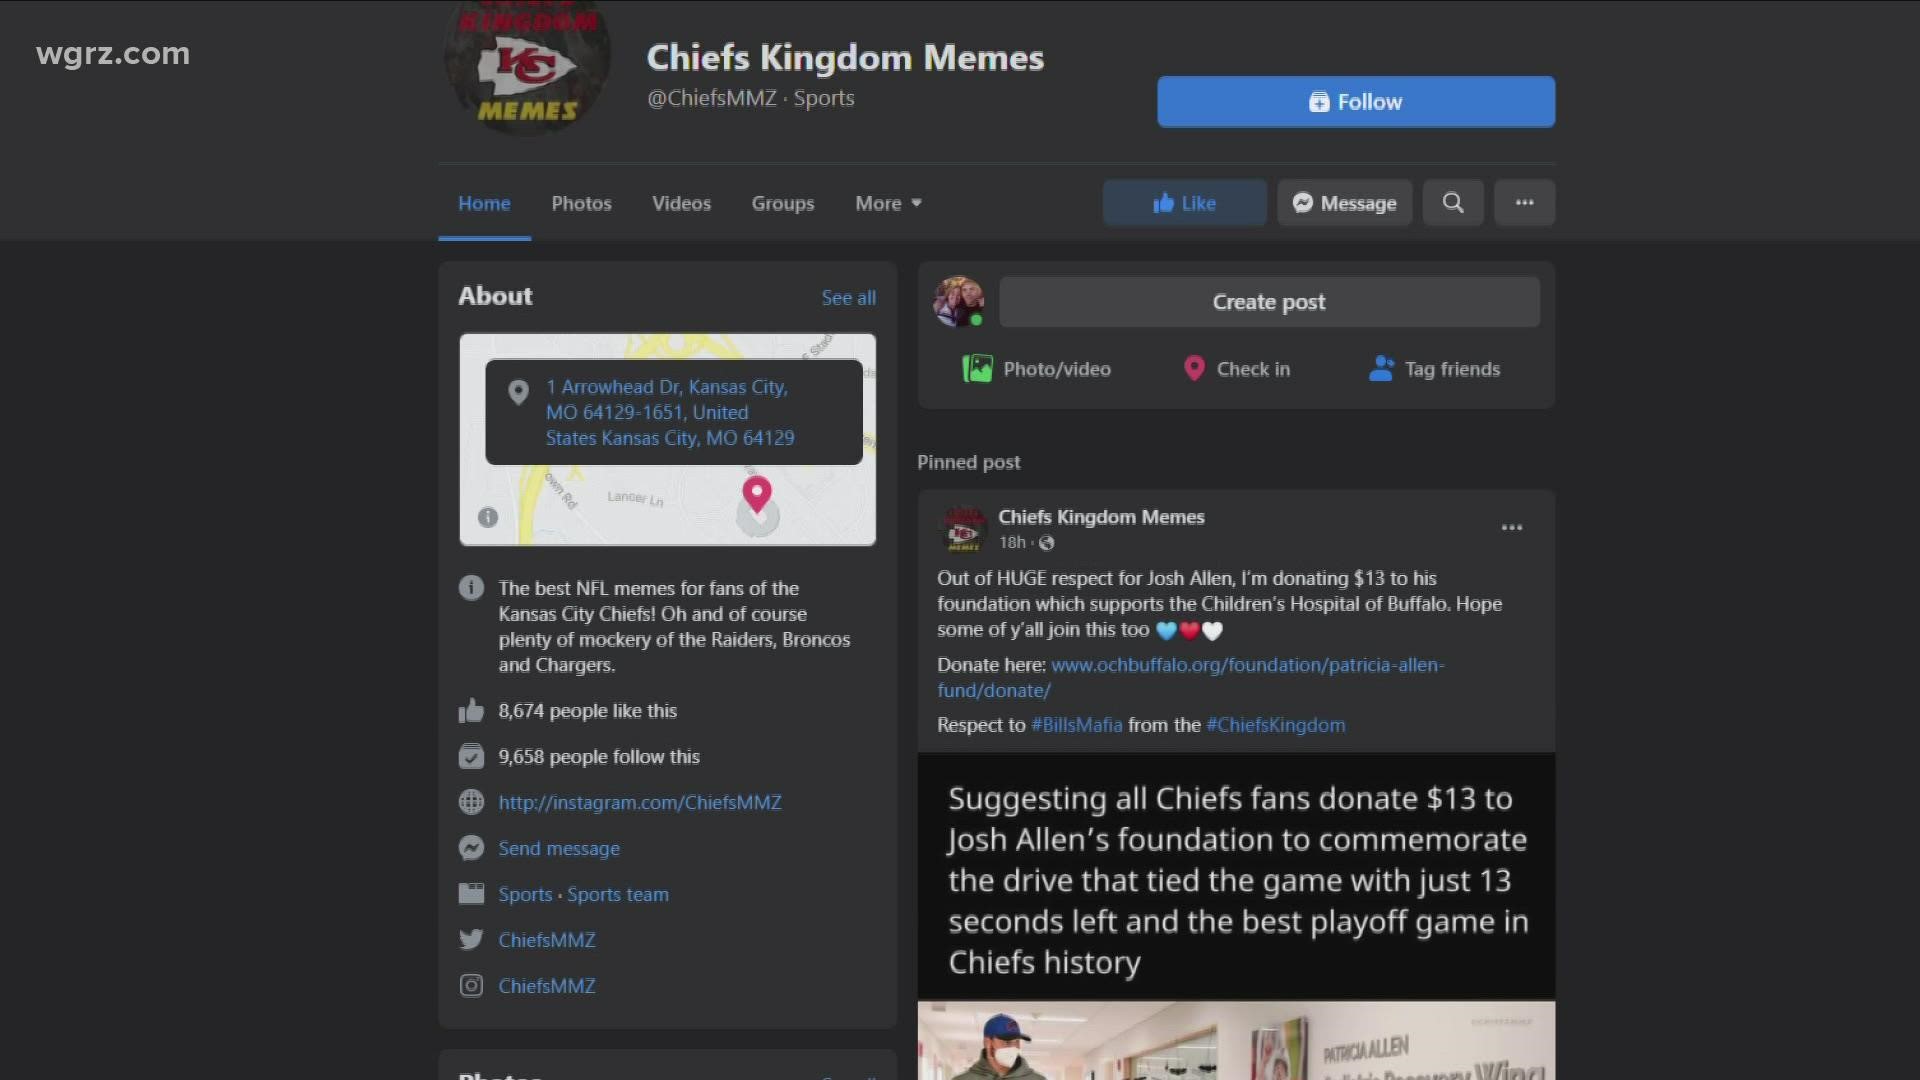 Facebook page called "Chief Kingdom Memes." the page told chiefs fans they should donate 13-dollars to the Patricia Allen fund at Oishei Children Hospital